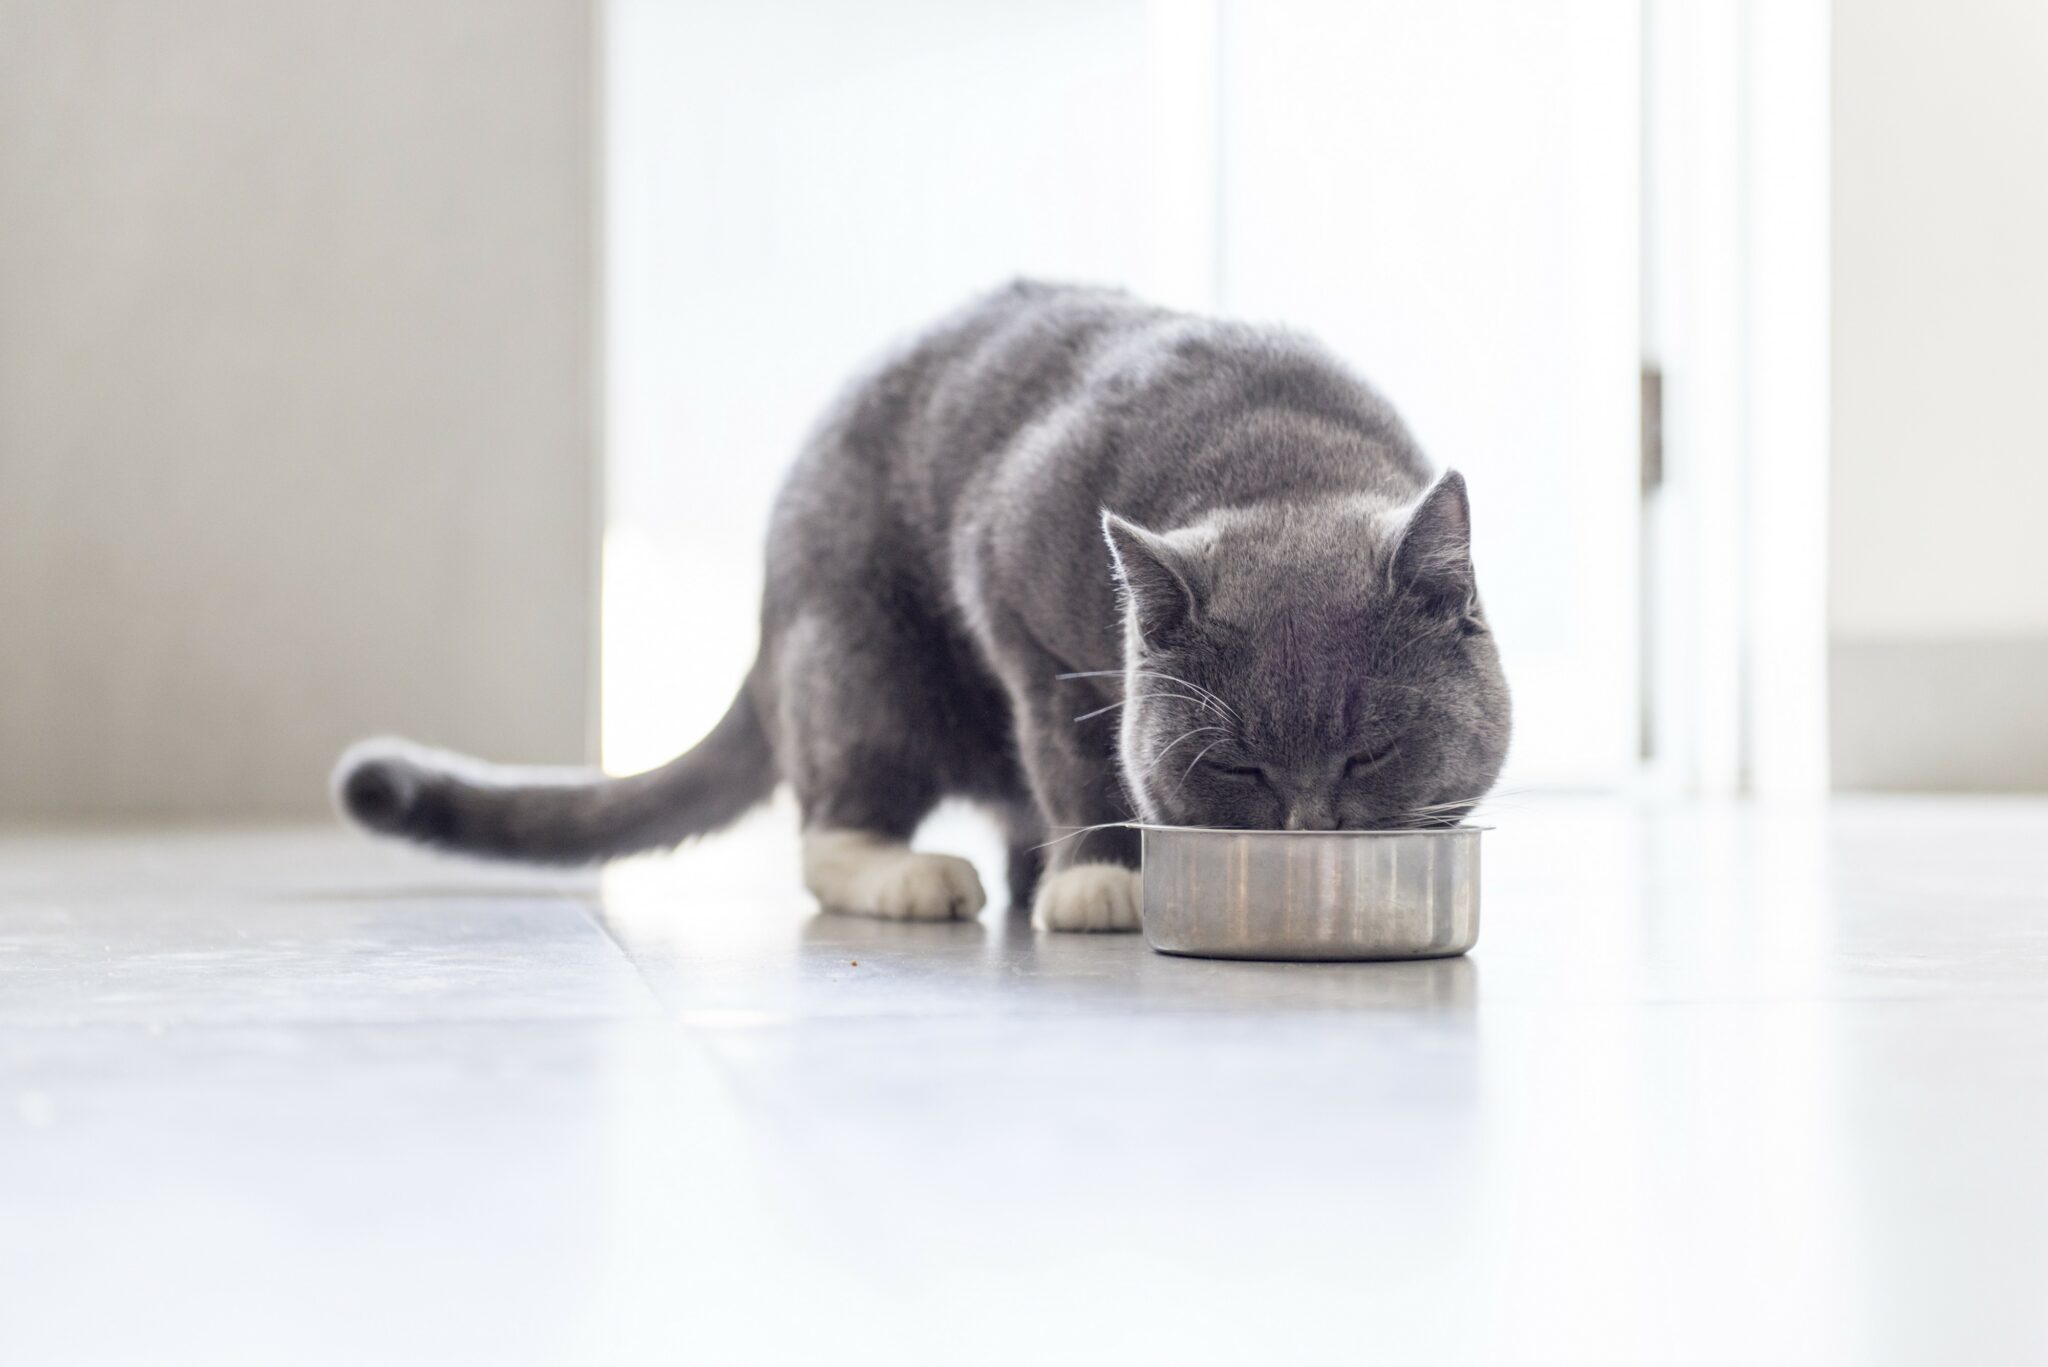 How To Choose The Best Food For Your Cat?